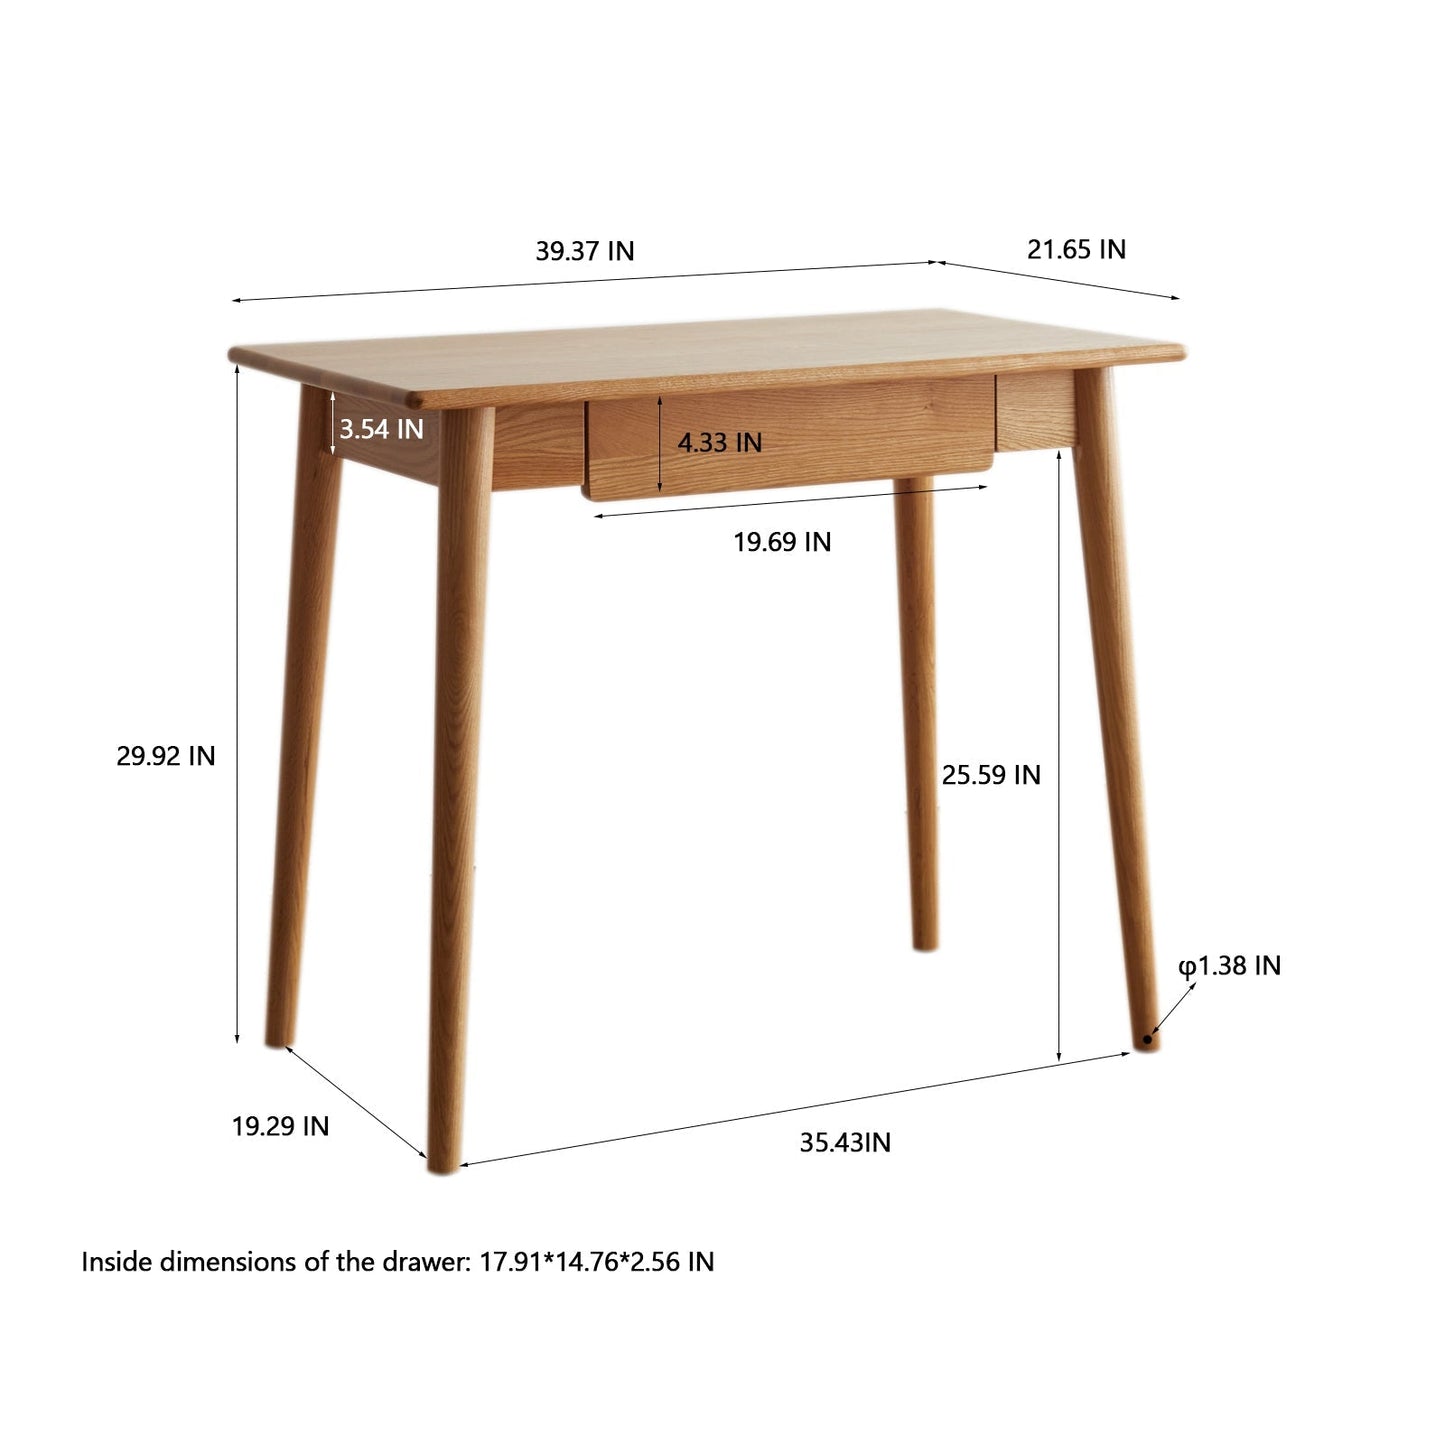 100% solid wood natural wood computer desk study desk oak natural wood PC desk work desk dressing table slim solid wood with drawer simple work from home width 100 cm depth 50 cm wood grain wooden